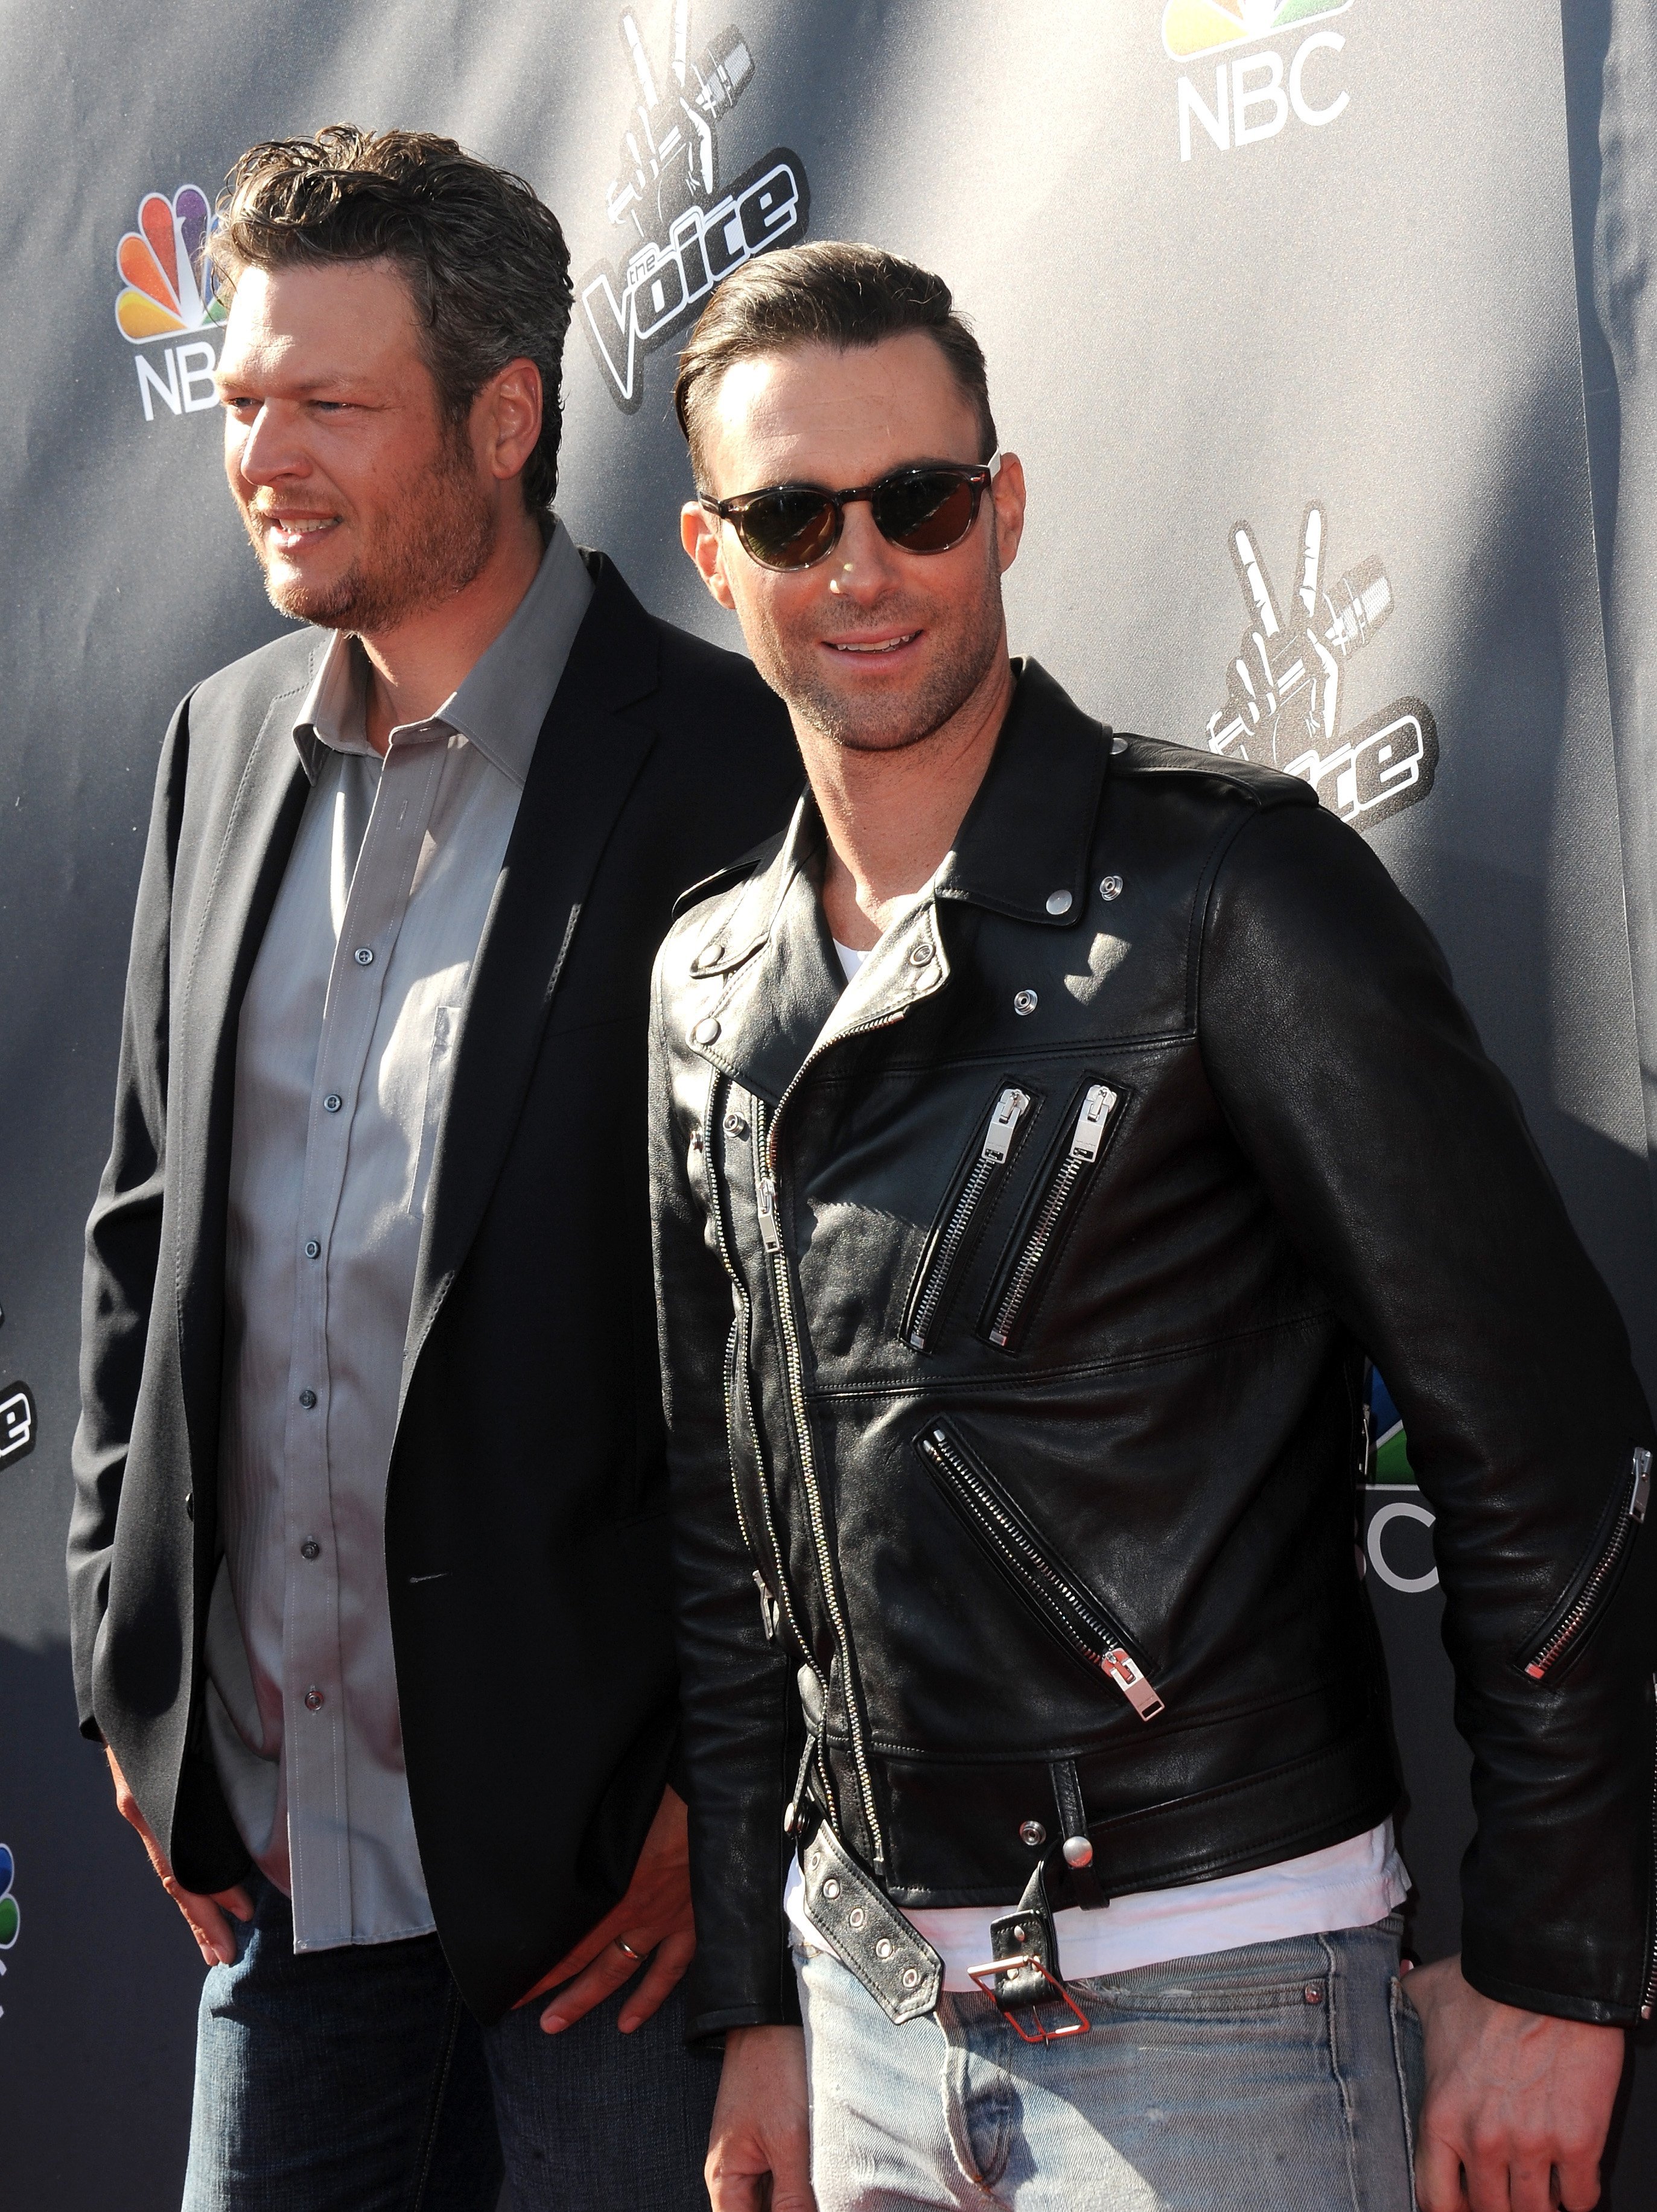 Blake Shelton and Adam Levine arrive for NBC's "The Voice" Red Carpet Event held at The Sayers Club on April 3, 2014. | Source: Getty Images